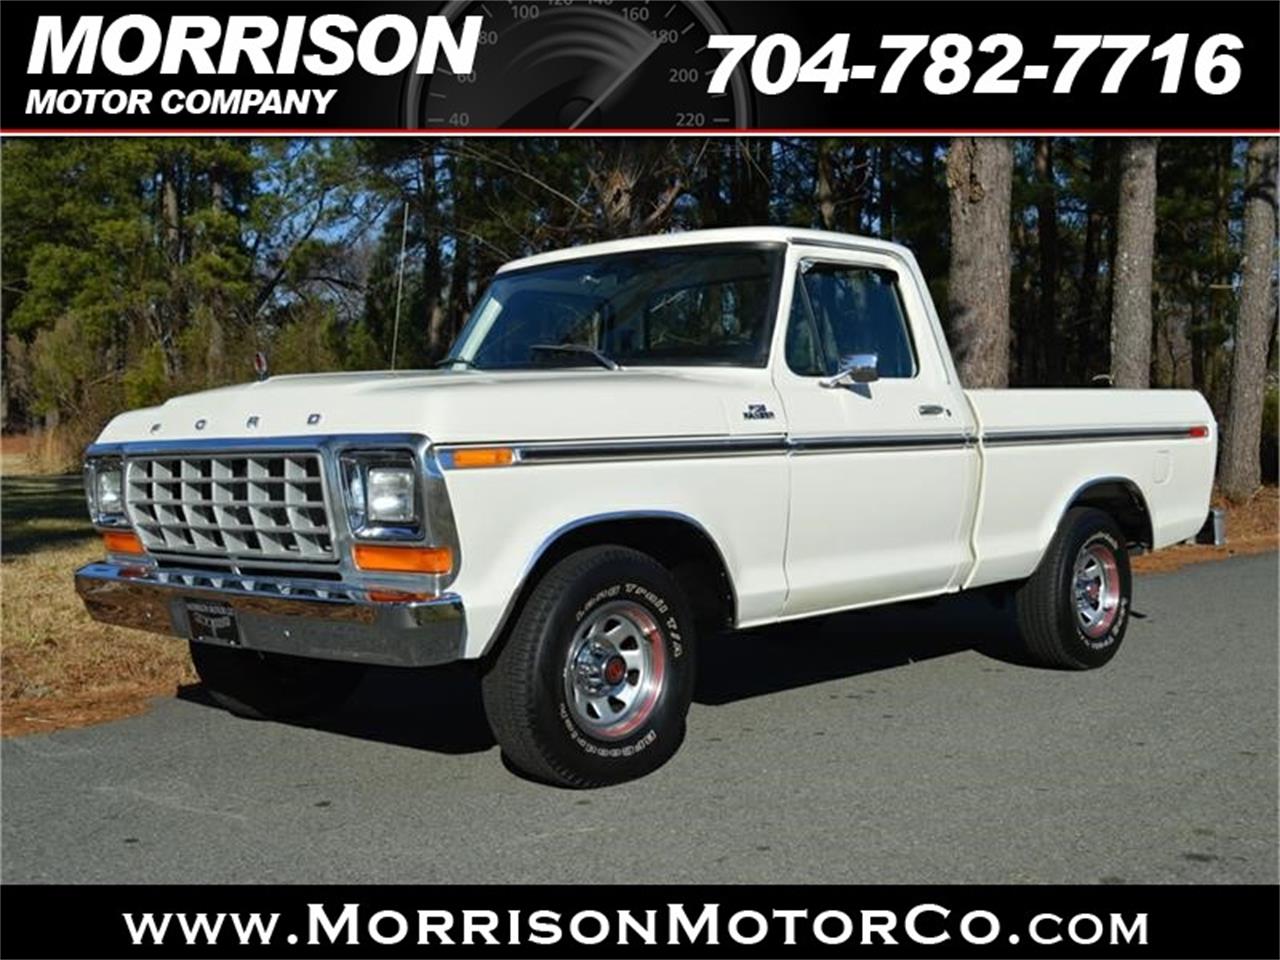 1979 ford f100 for sale classiccars com cc 1062904 1979 ford f100 for sale classiccars